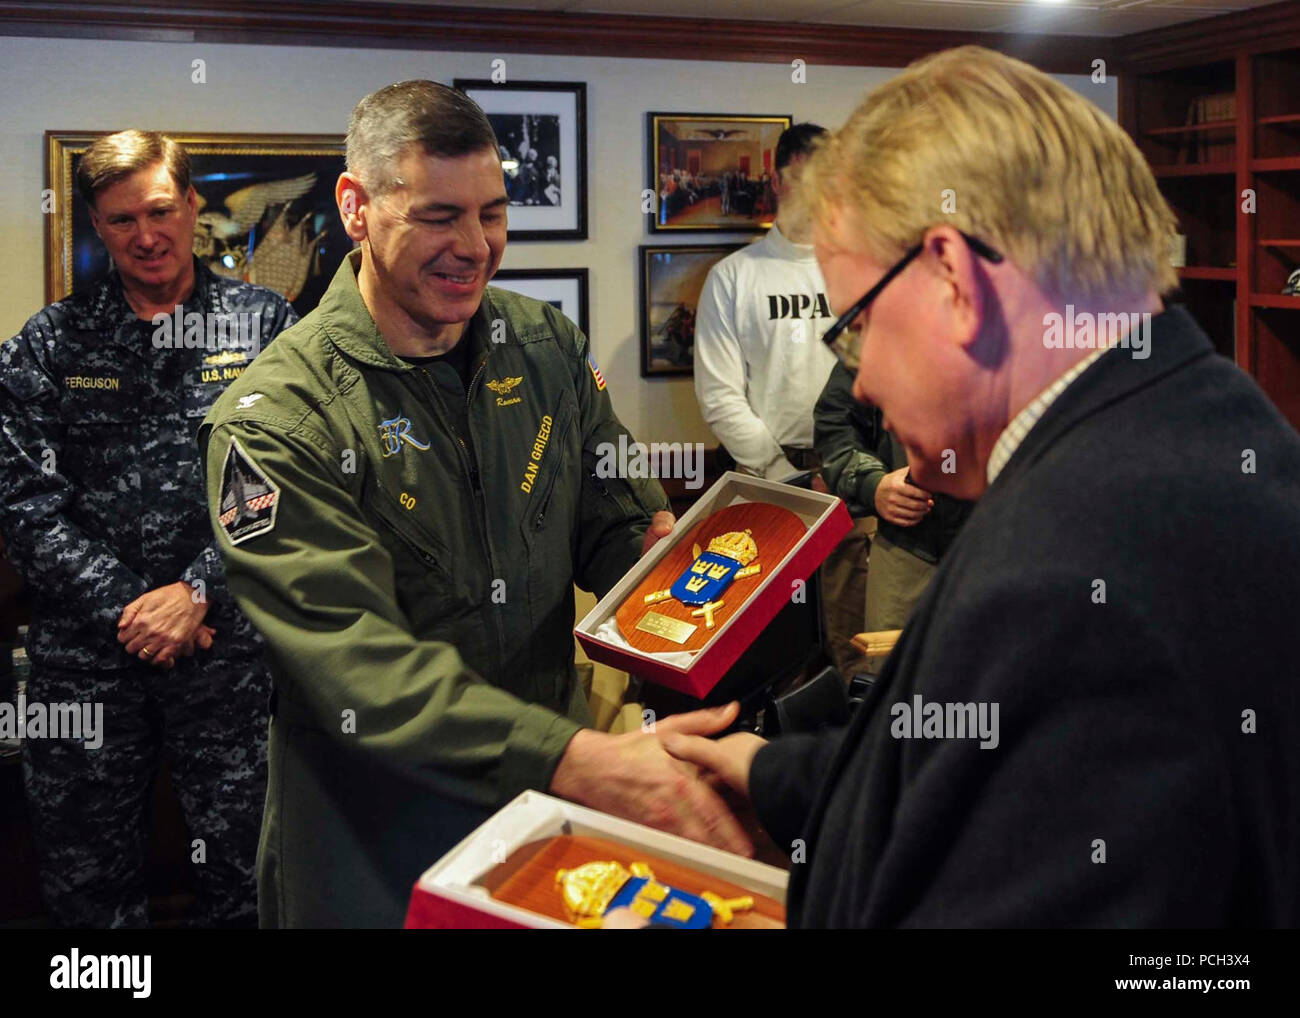 ATLANTIC OCEAN (March 22, 2015) Commanding Officer of the Nimitz-class aircraft carrier USS Theodore Roosevelt (CVN 71) Capt. Daniel Grieco, left, receives a token of appreciation from the Swedish Minister of Defence Peter Hultqvist aboard Theodore Roosevelt March 22, 2015. Theodore Roosevelt, homeported in Norfolk, is conducting naval operations in the U.S. 6th Fleet area of operations in support of U.S. national security interests in Europe. Stock Photo